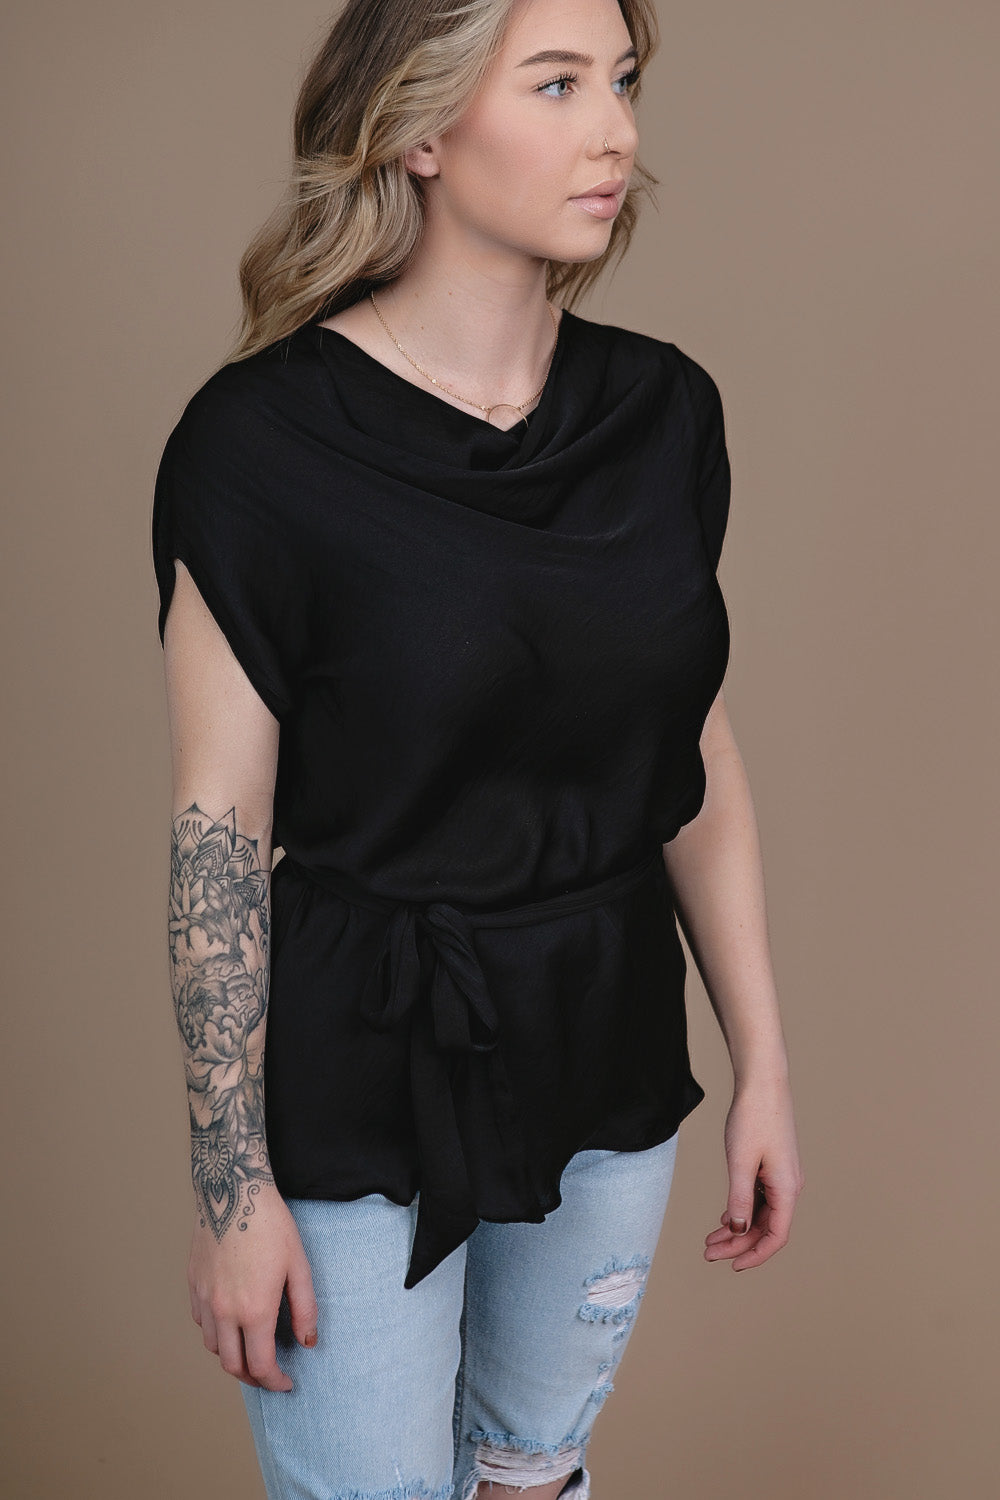 The Solstice Blouse